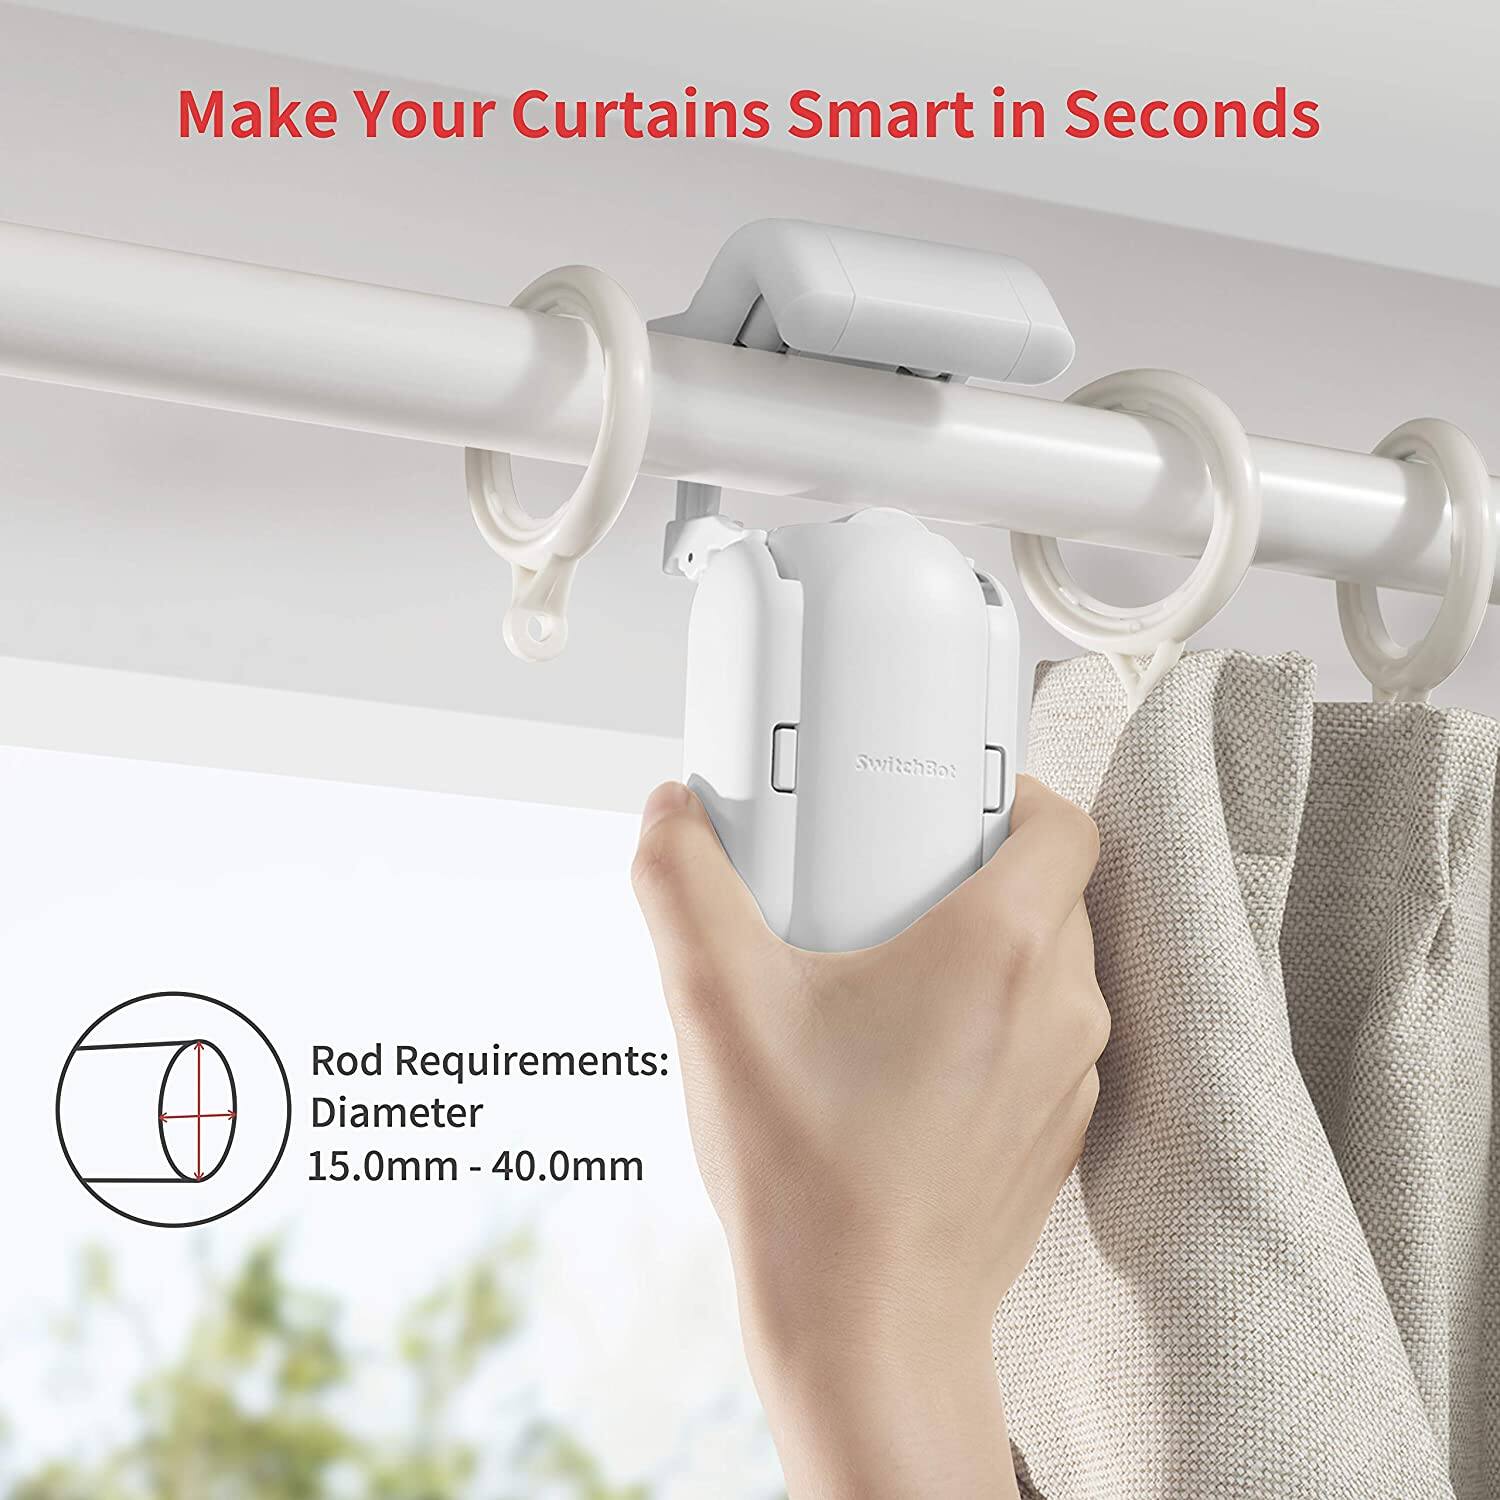 SwitchBot Curtain Smart Electric Motor $63.57+ Free Shipping w/ Prime